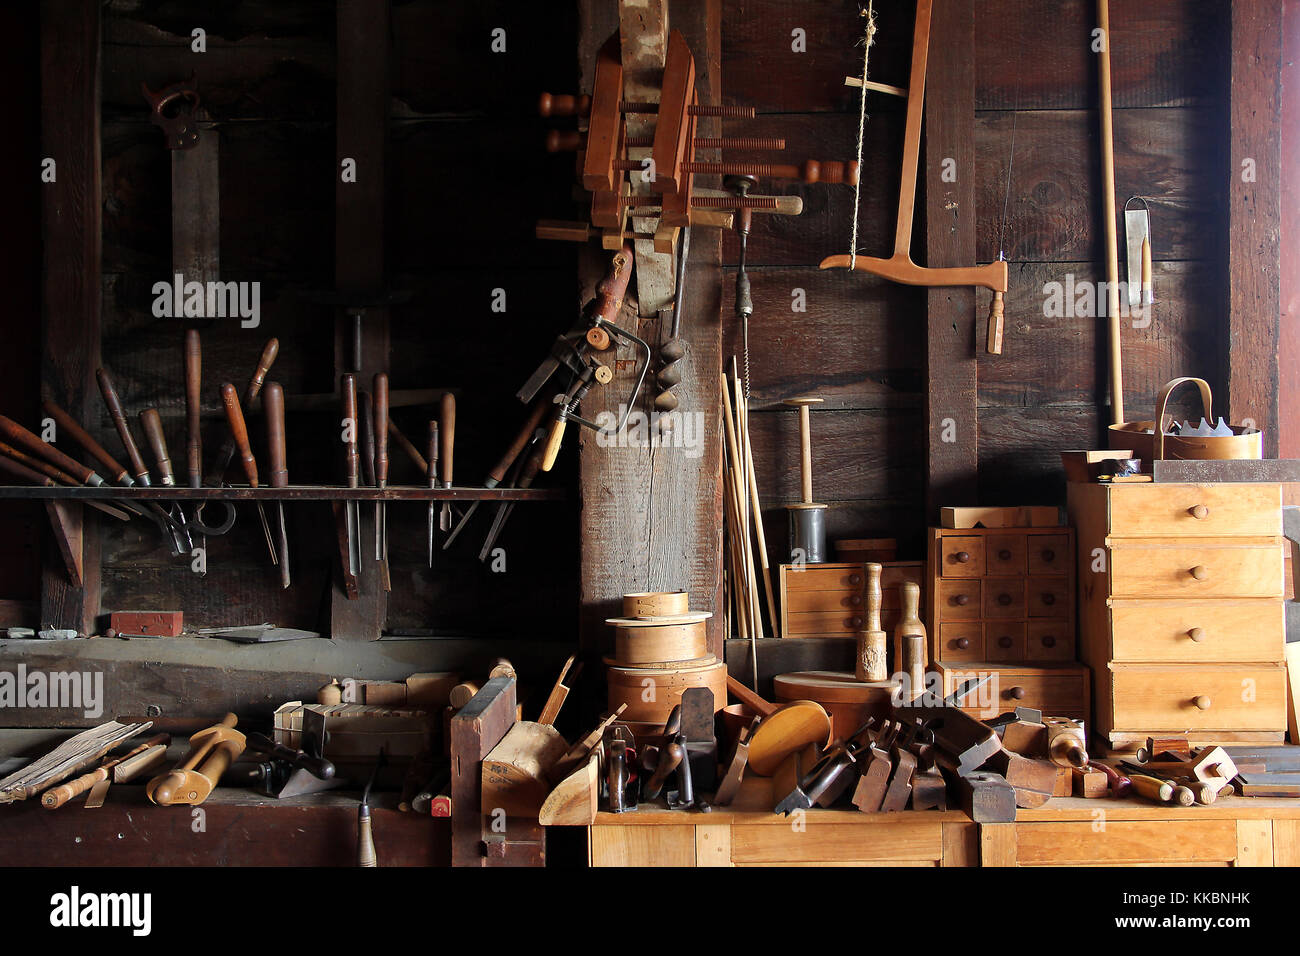 Old tools workshop with saws, planes, chisels, hammers, and sets of drawers. Stock Photo